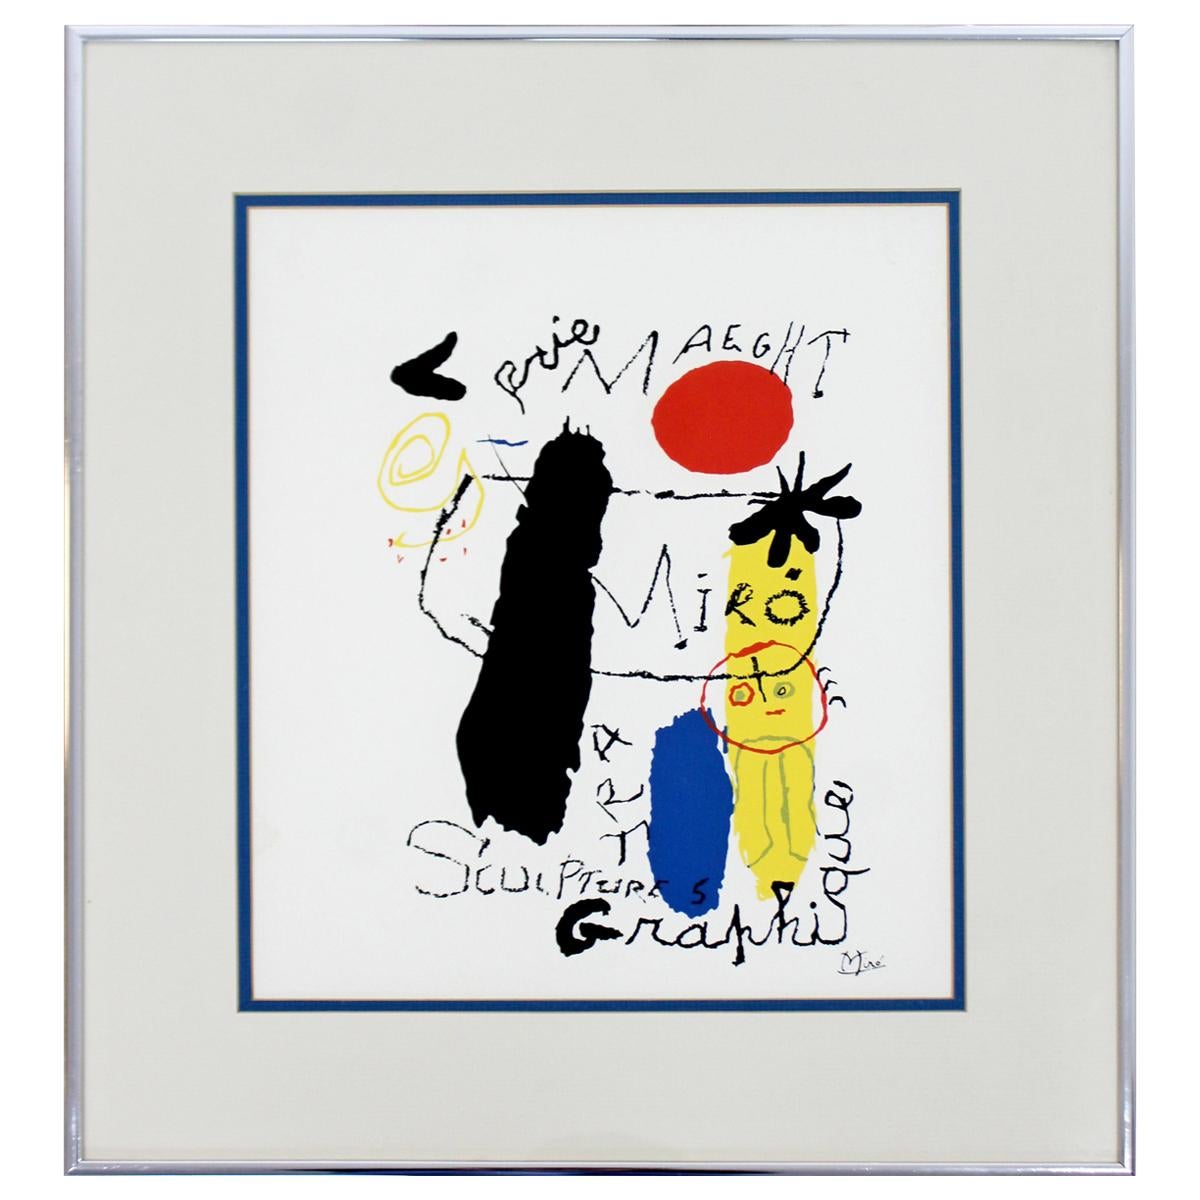 Contemporary Modern Framed Poster Print Joan Miro Galerie Maeght Graphique 1980s